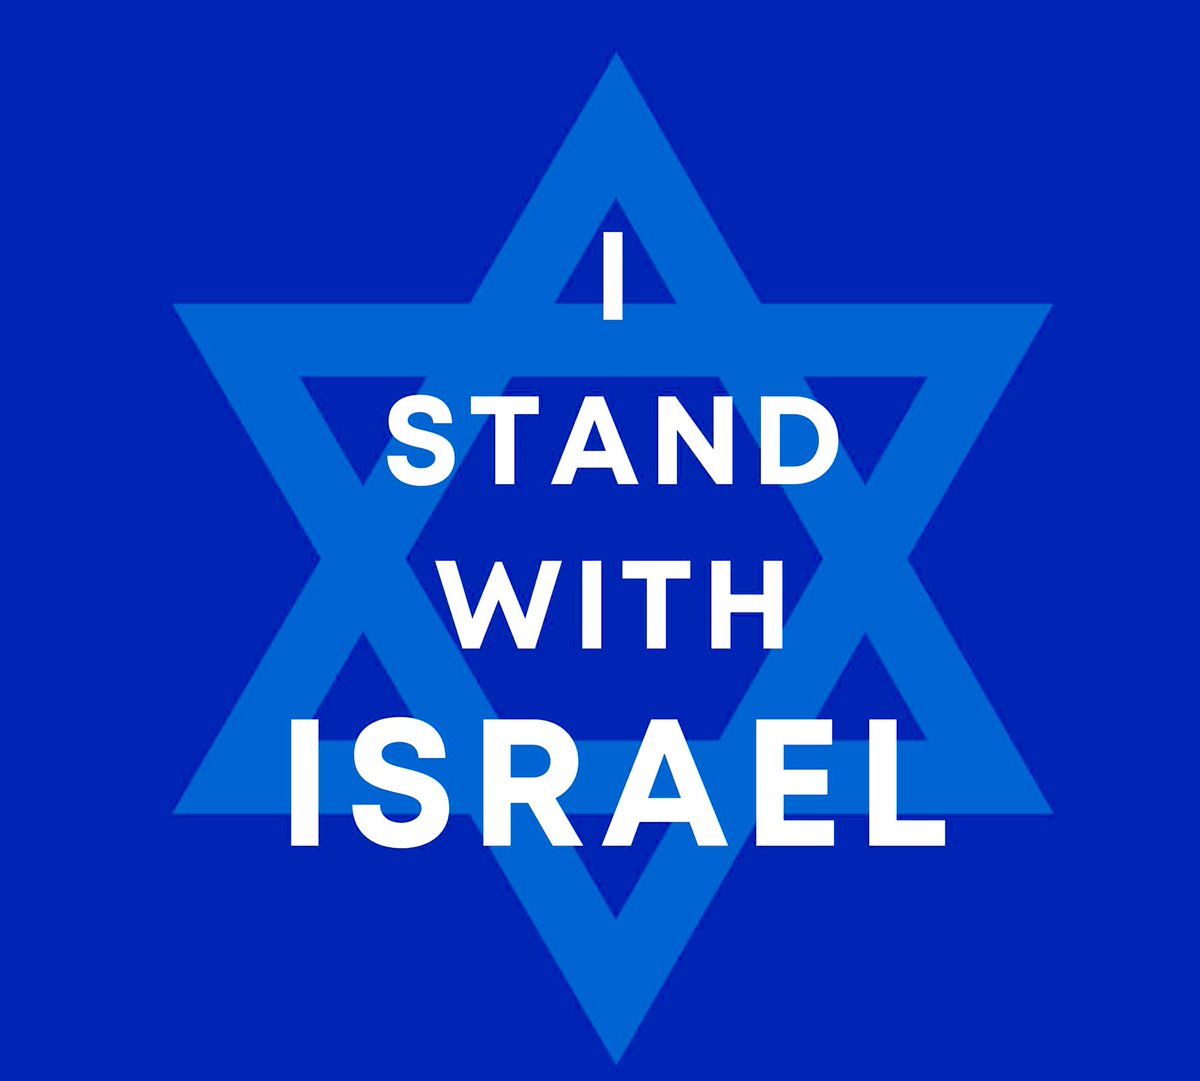 I Stand With Israel 🇮🇱 If you too…Retweet it 🙏